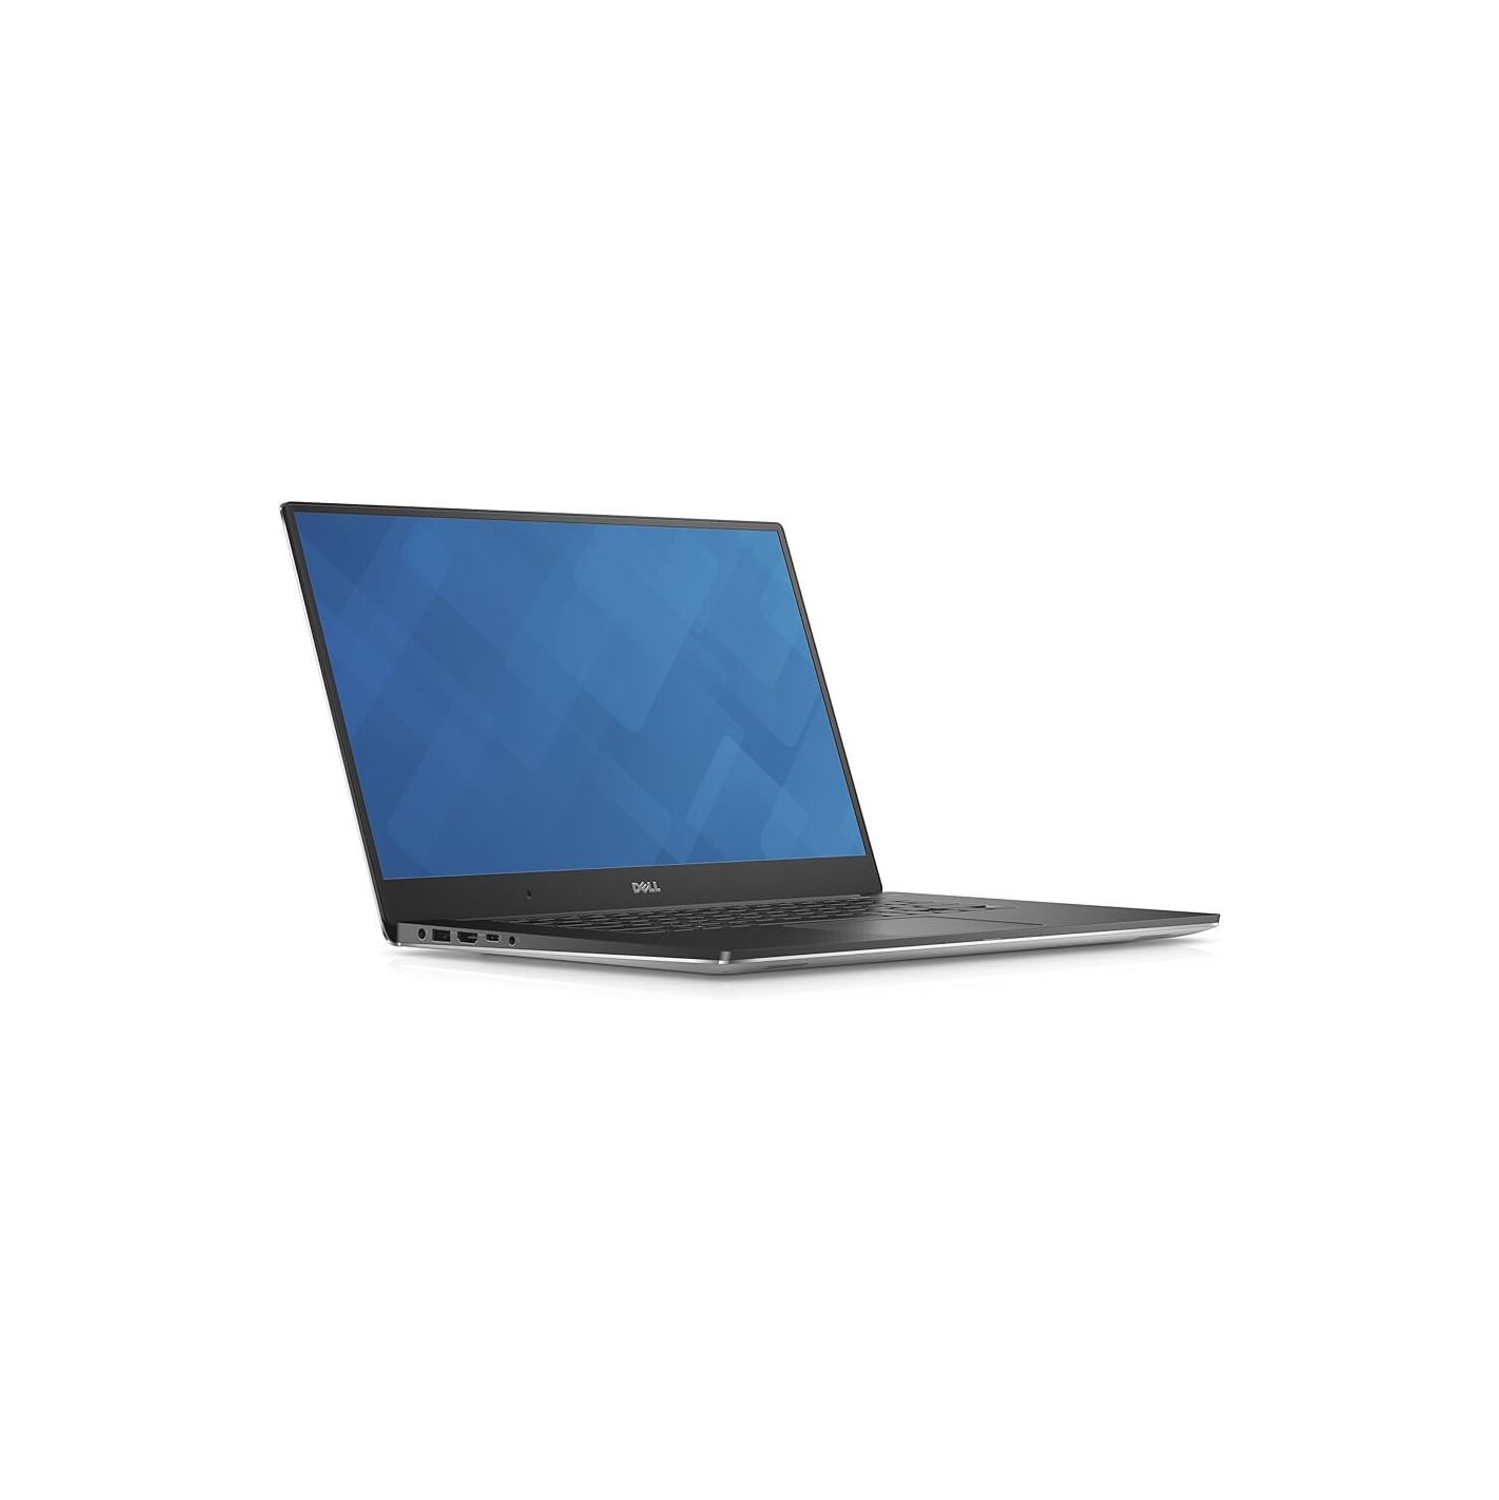 Refurbished (Excellent) - Dell Precision 5520 Mobile Workstation 15" Laptop / Intel Core i7-9850H / 32GB RAM / 512GB SSD / Nvidia Quadro T1000 with 4GB Graphics